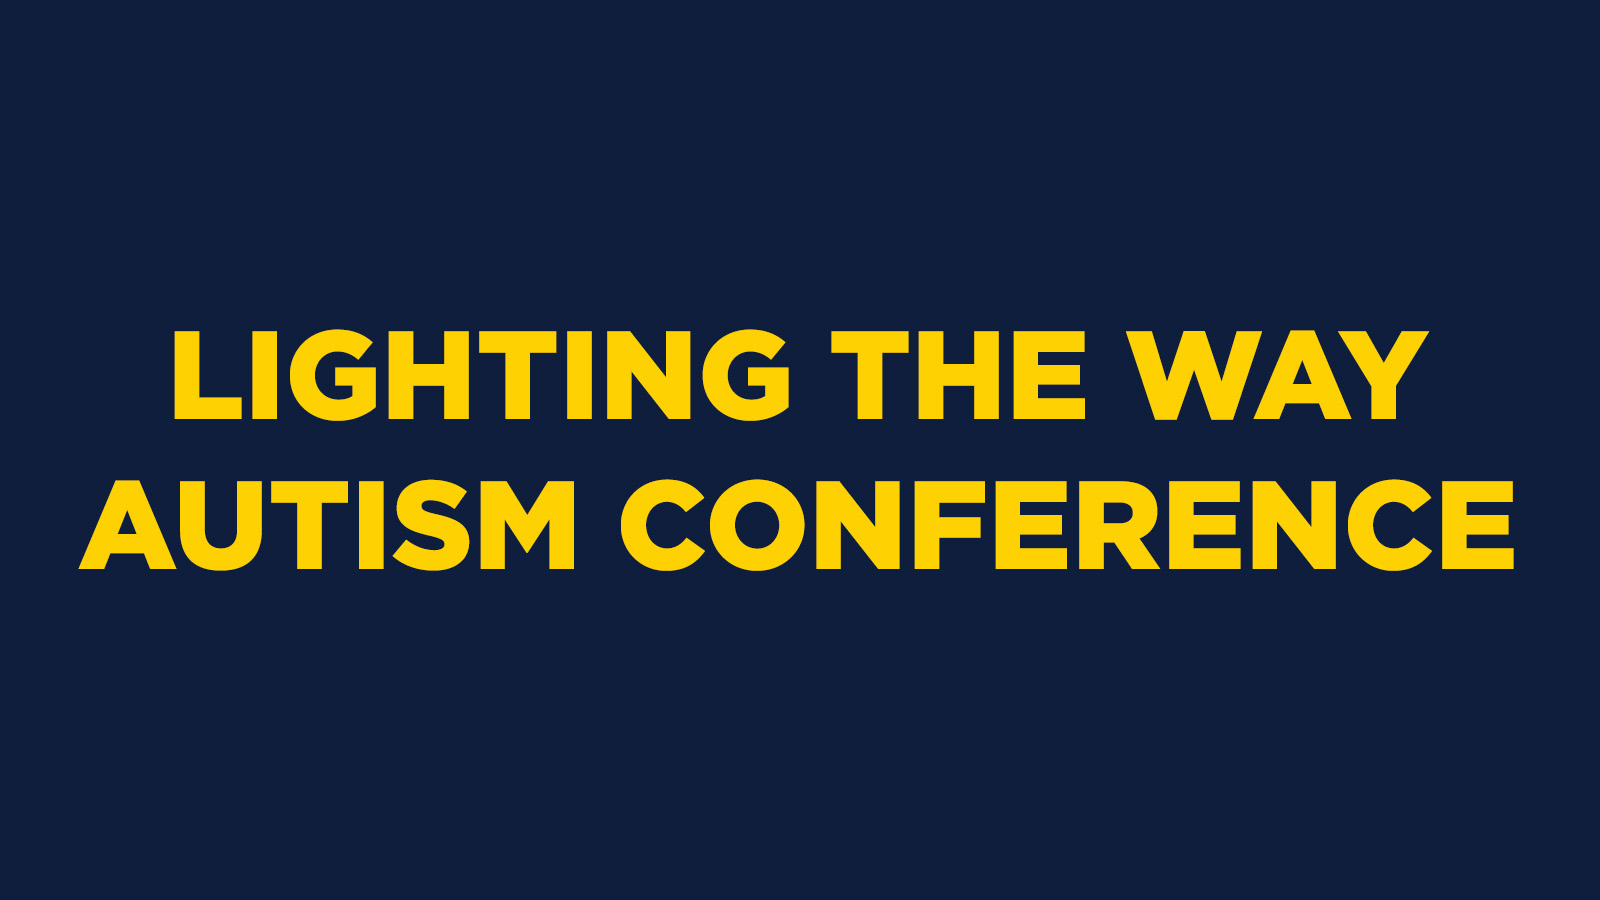 LIGHTING THE WAY AUTISM CONFERENCE